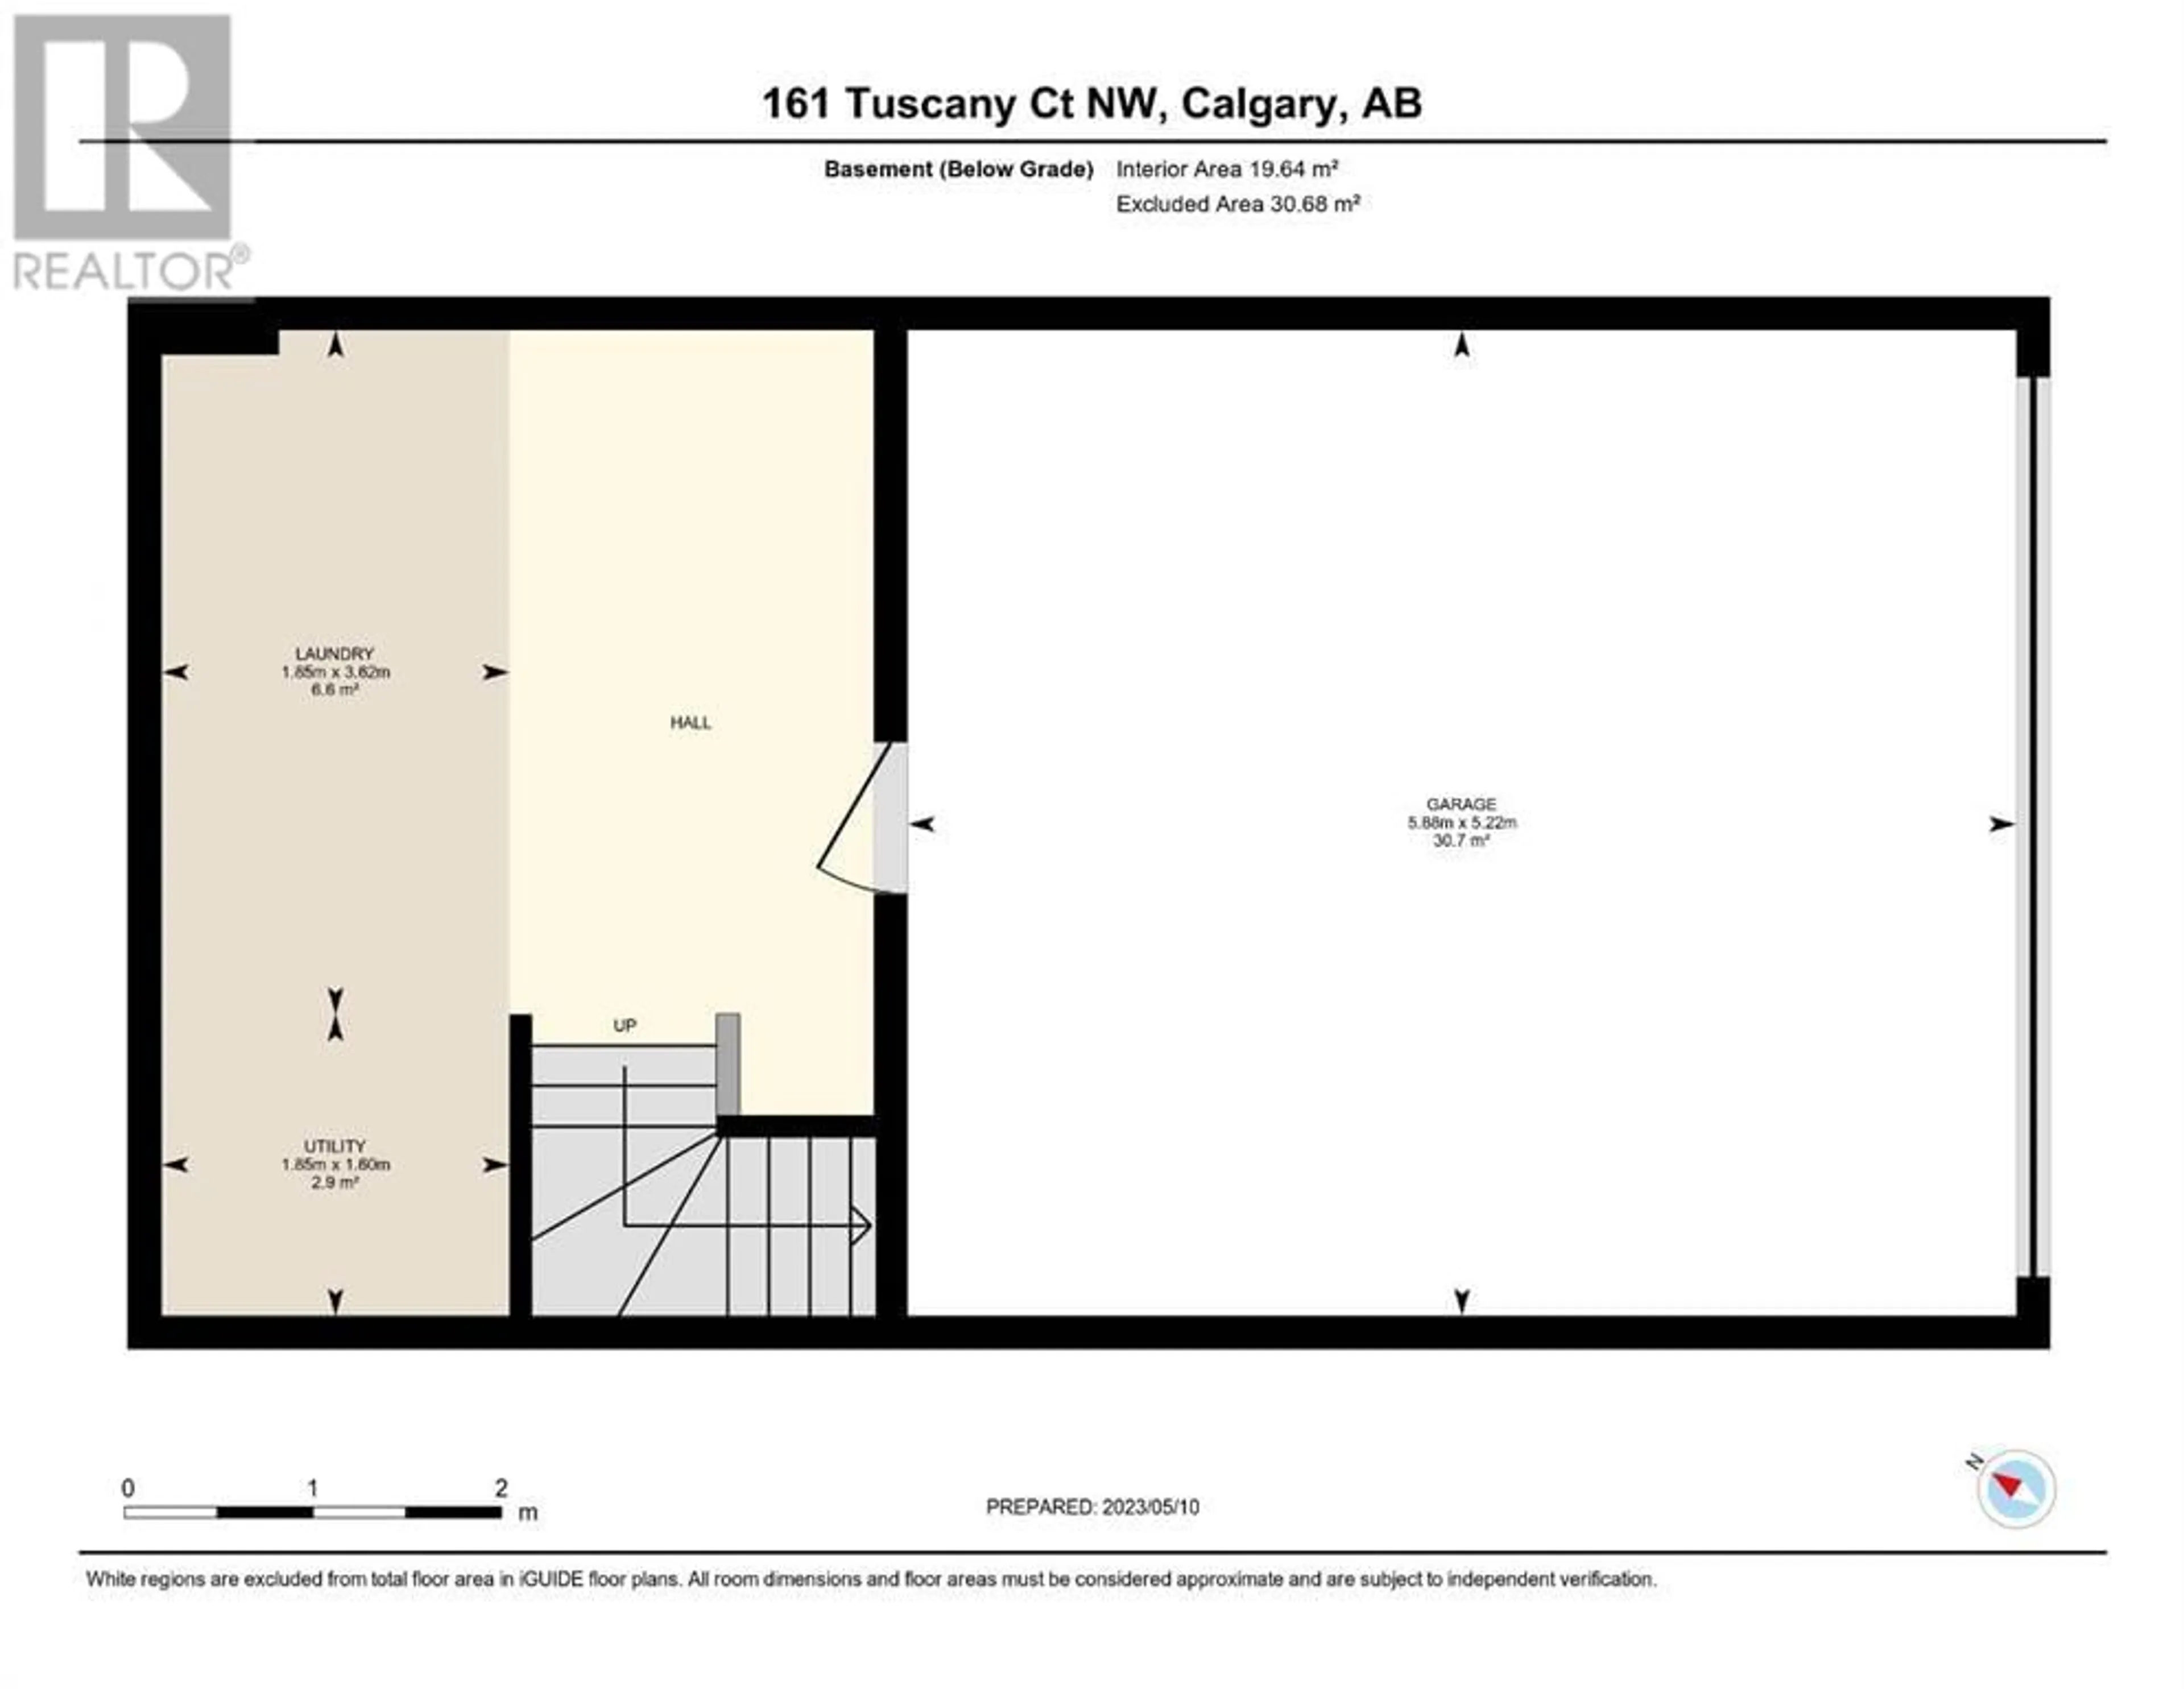 Floor plan for 161 Tuscany Court NW, Calgary Alberta T3L2Y9